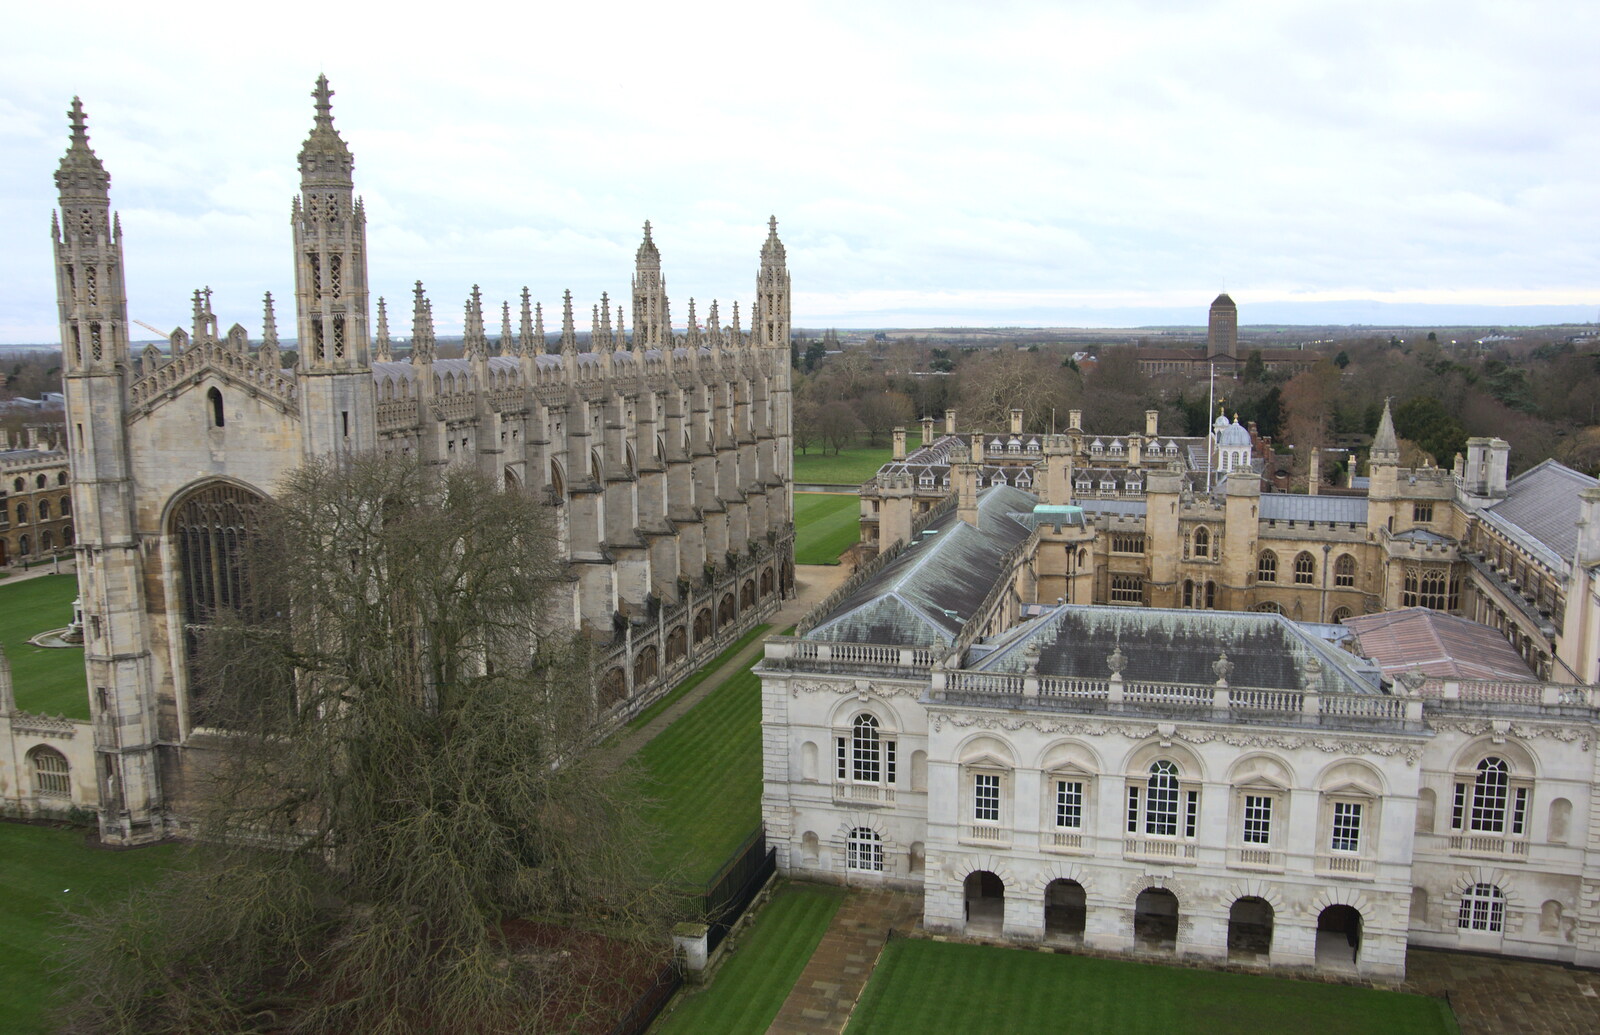 King's College Chapel and 'Old Schools' from The SwiftKey Reunion Brunch, Regent Street, Cambridge - 12th January 2019